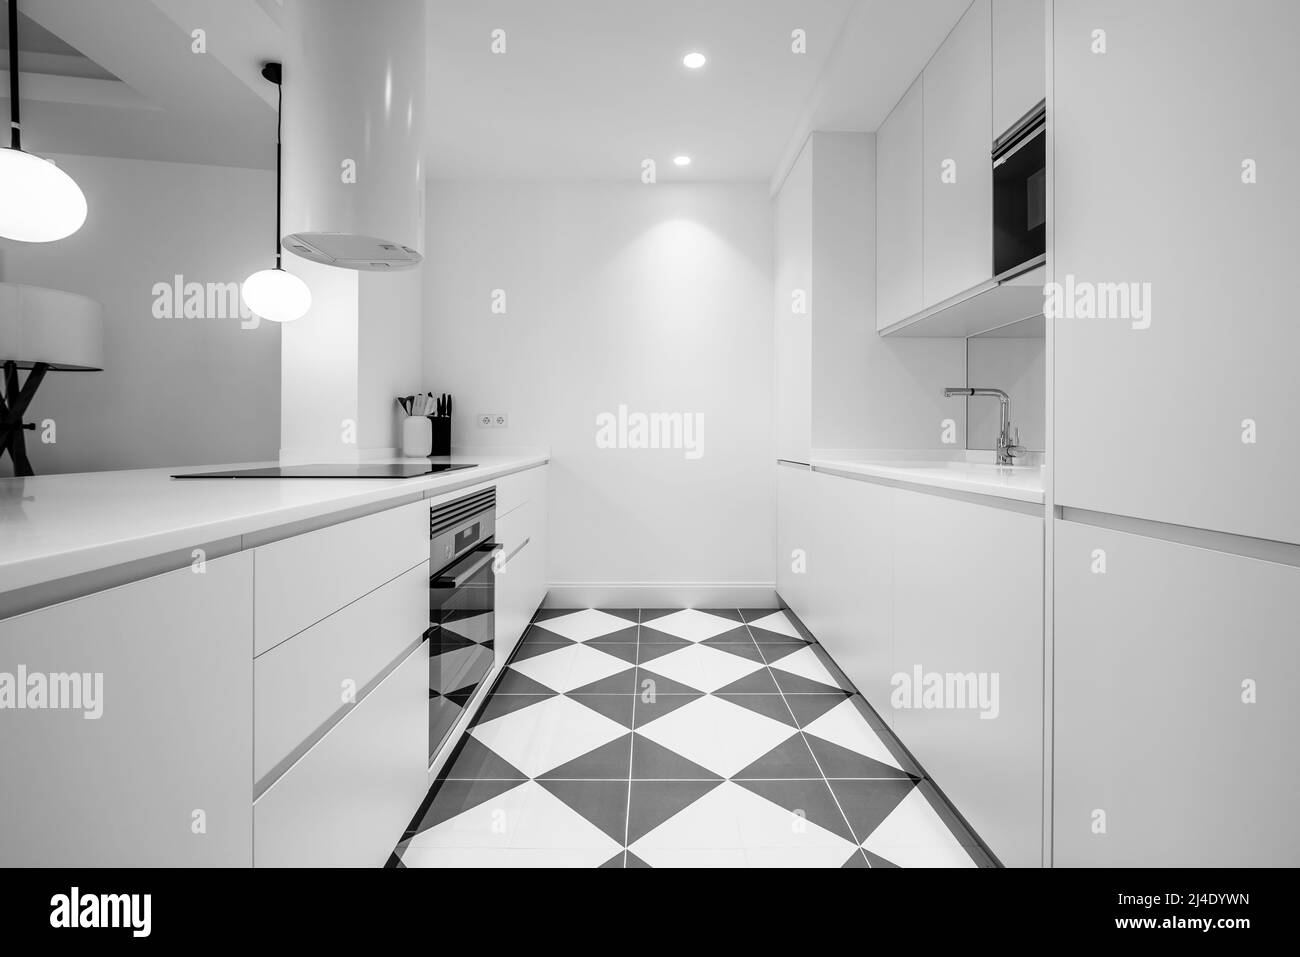 Kitchen with white wooden cabinets, straight lines and integrated appliances, gray and white floors and white hood Stock Photo